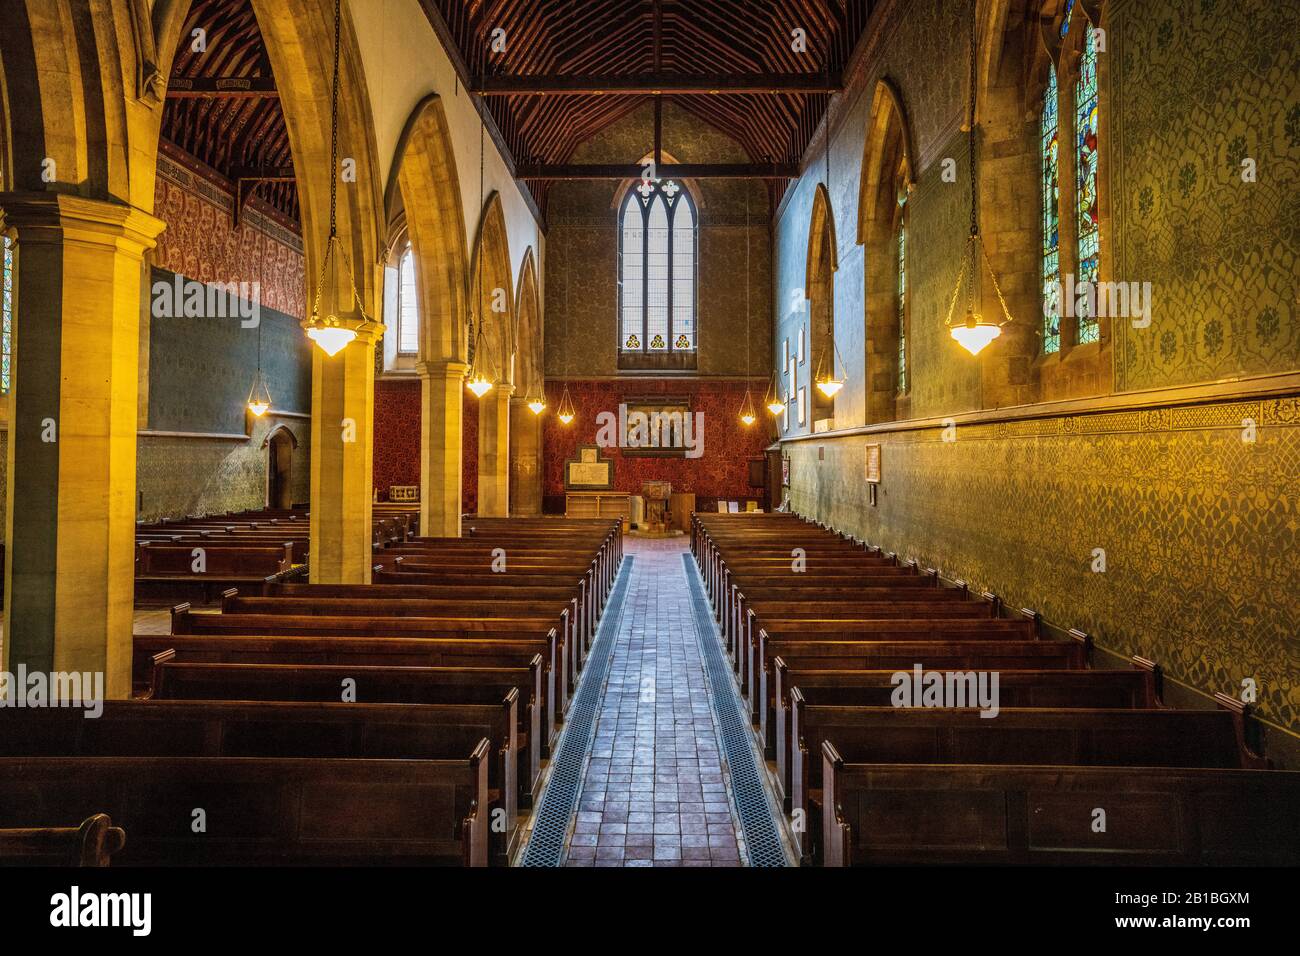 All Saints Arts and Crafts Church Cambridge. The interior of All Saints Church in Cambridge is decorated in Arts & Crafts style. Arch. George Bodley. Stock Photo